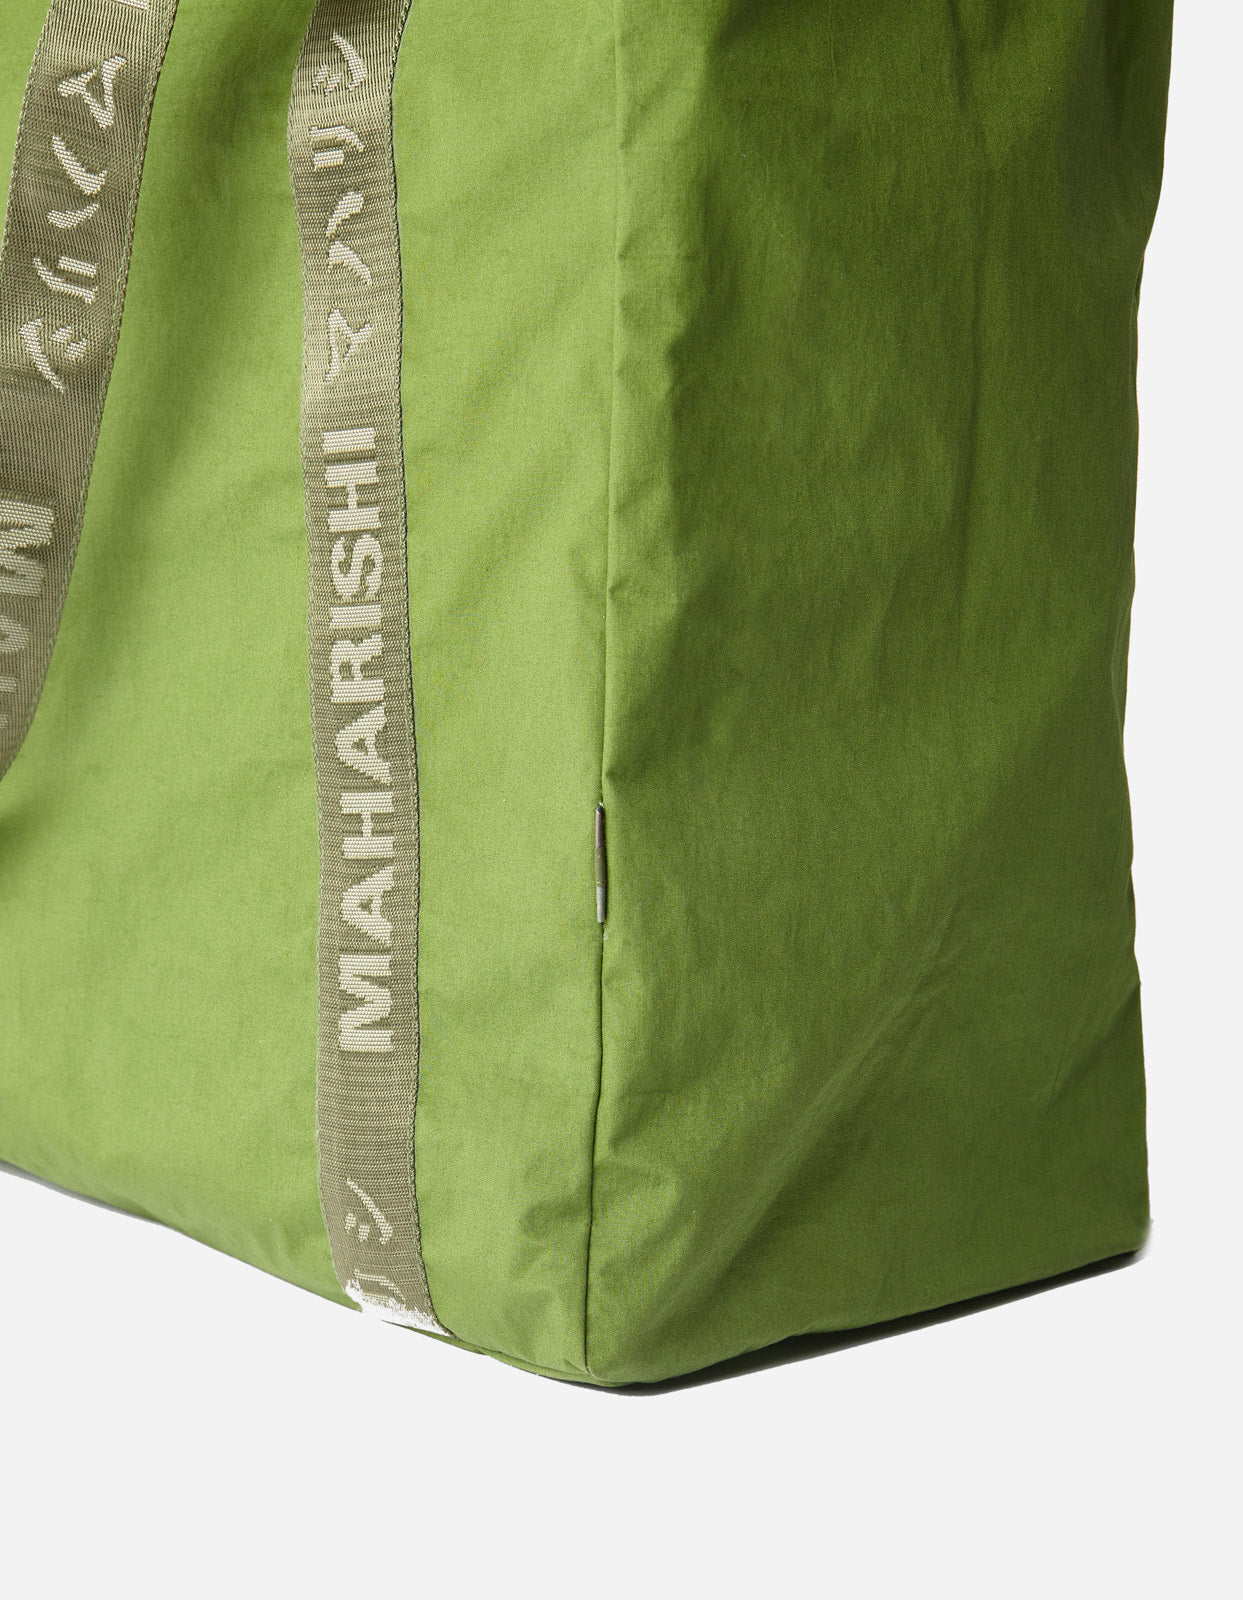 5046 WR Stand Utility Tote Bag Green Shoot